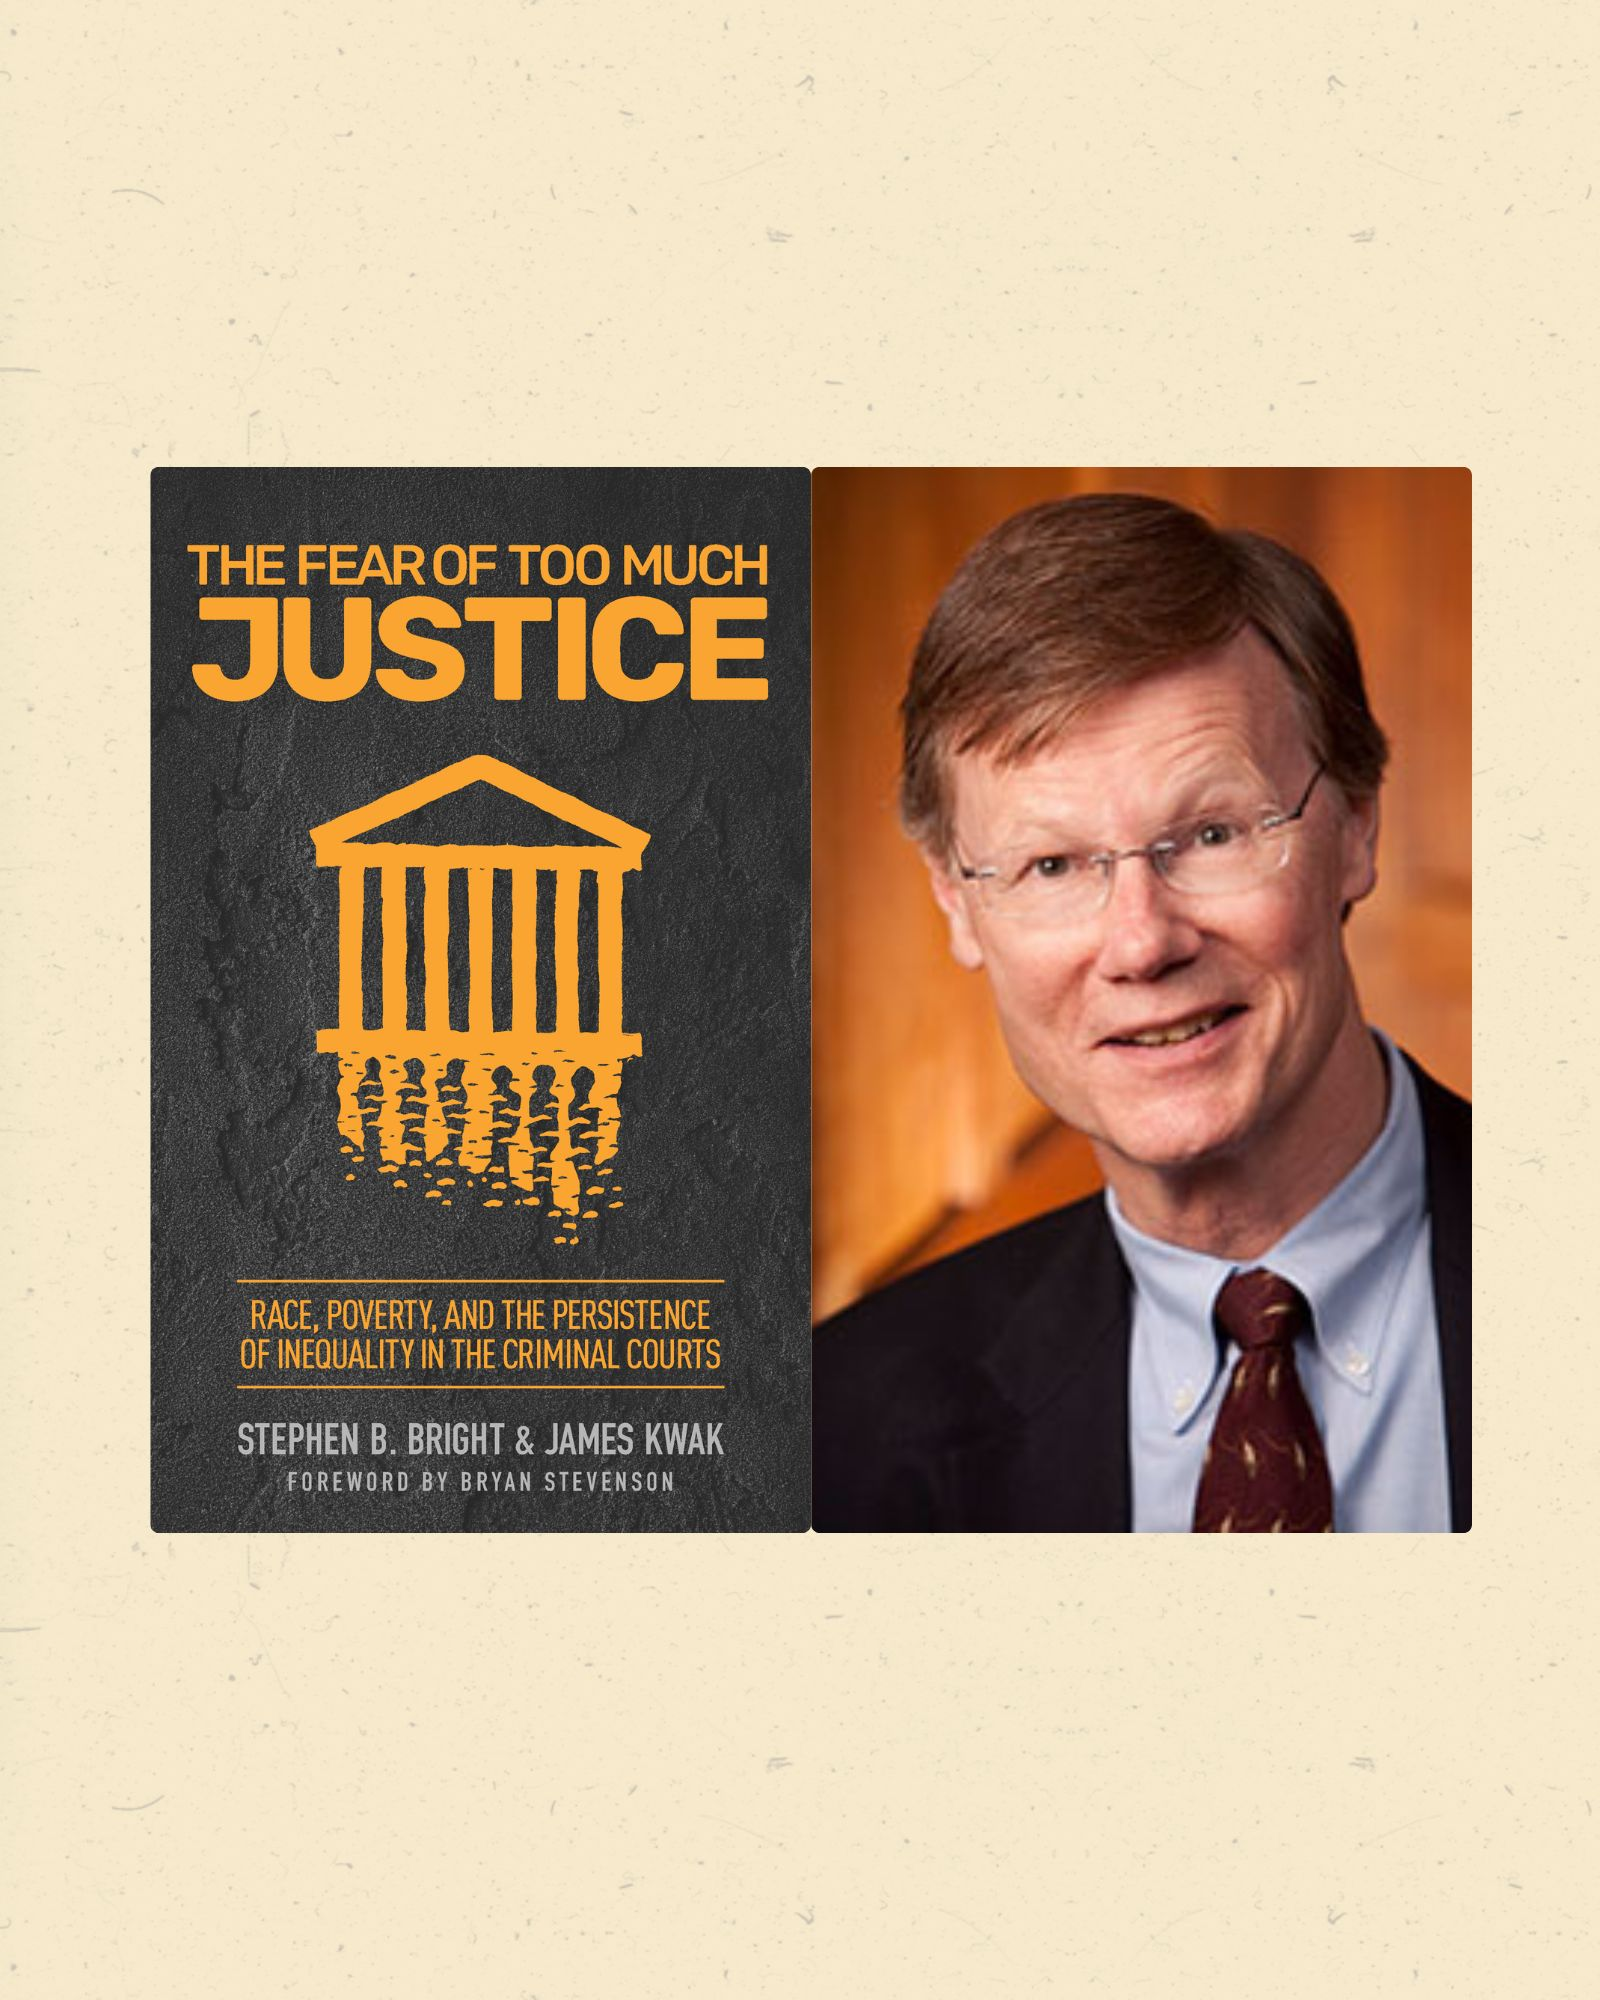 "The Fear of Too Much Justice" reveals U.S. court disparities